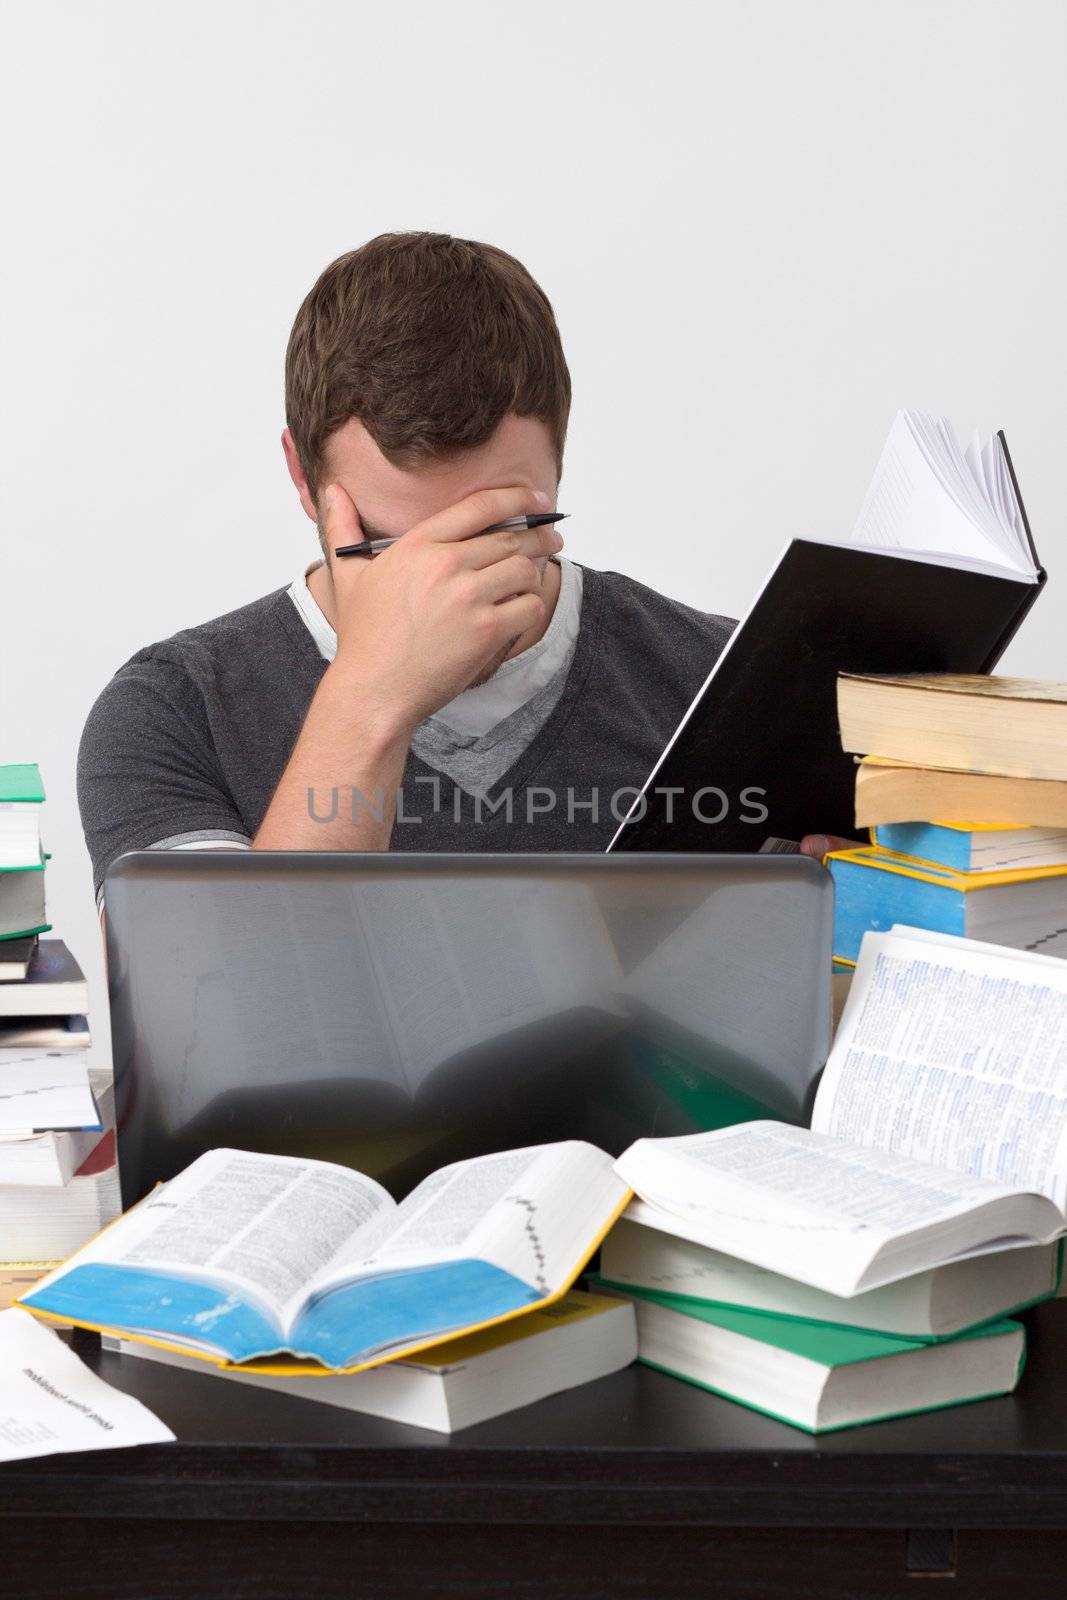 Young Student overwhelmed with studying with piles of books in front of him